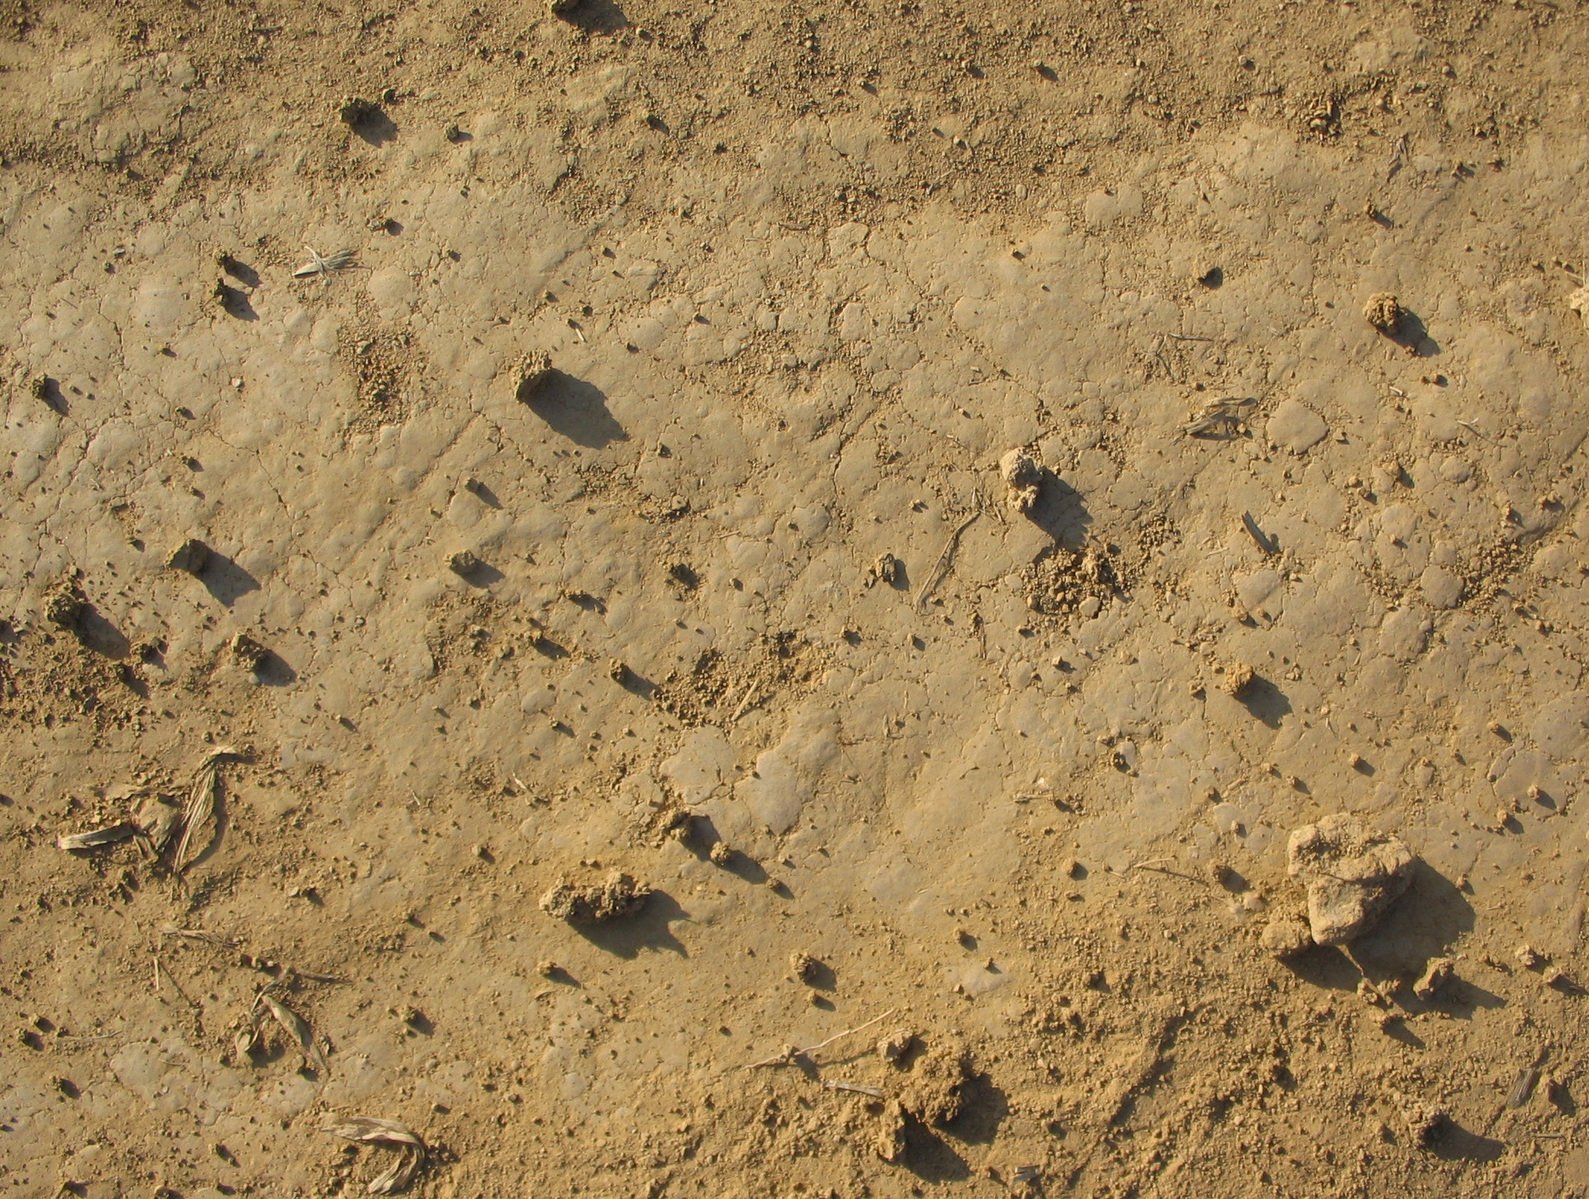 footprints on sand in a sandy area with one animal